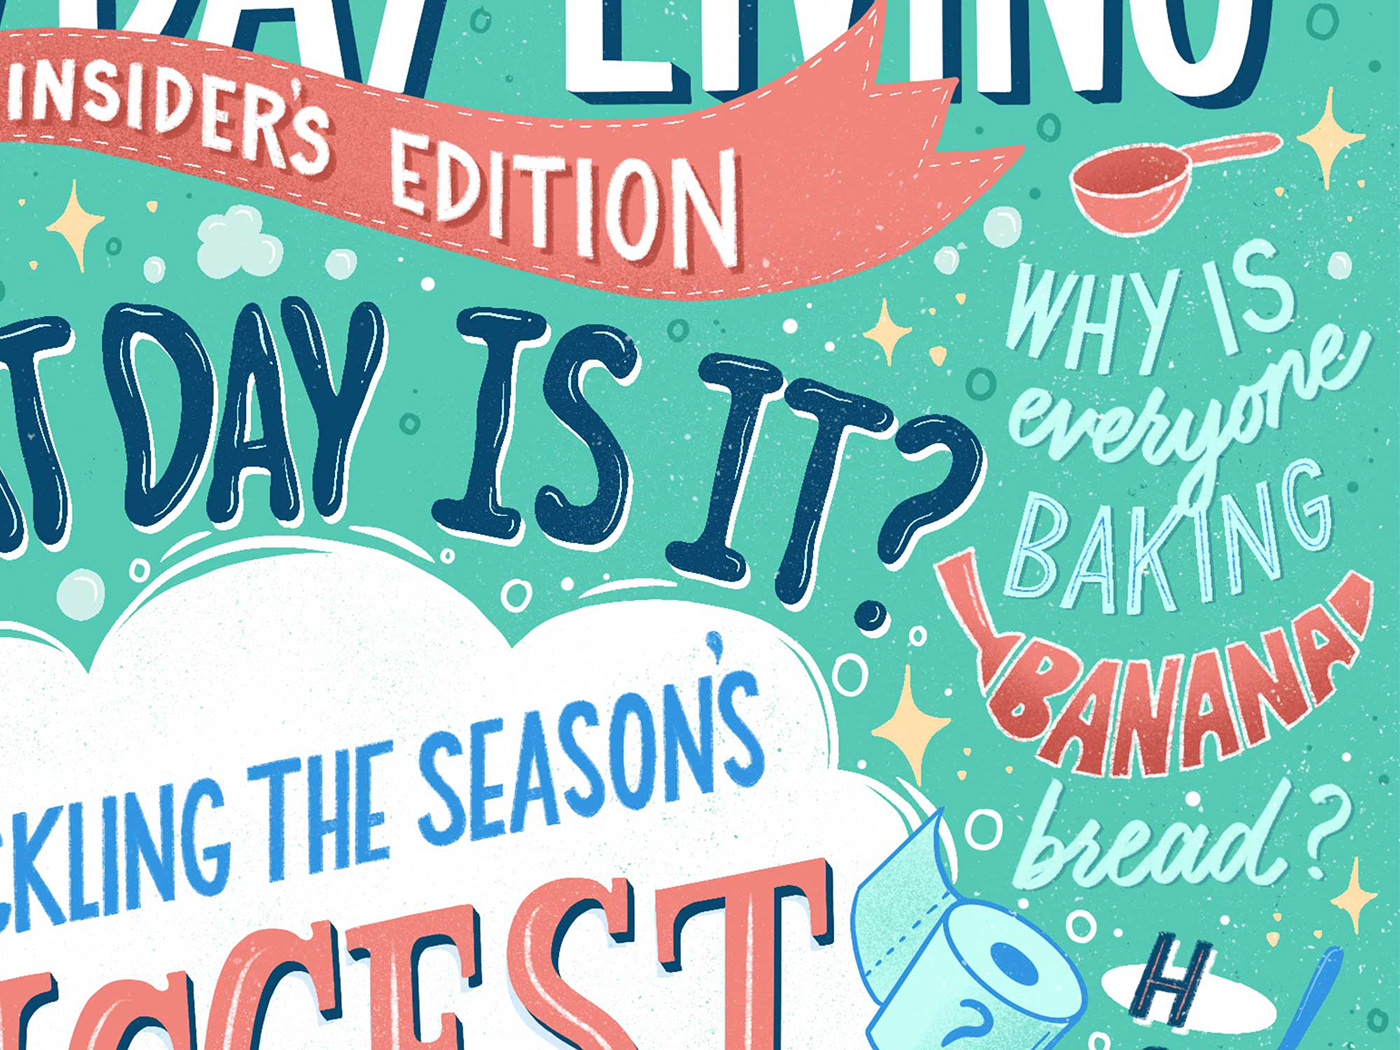 Magazine cover close up featuring hand lettered phrases playing off common quarantine situations 